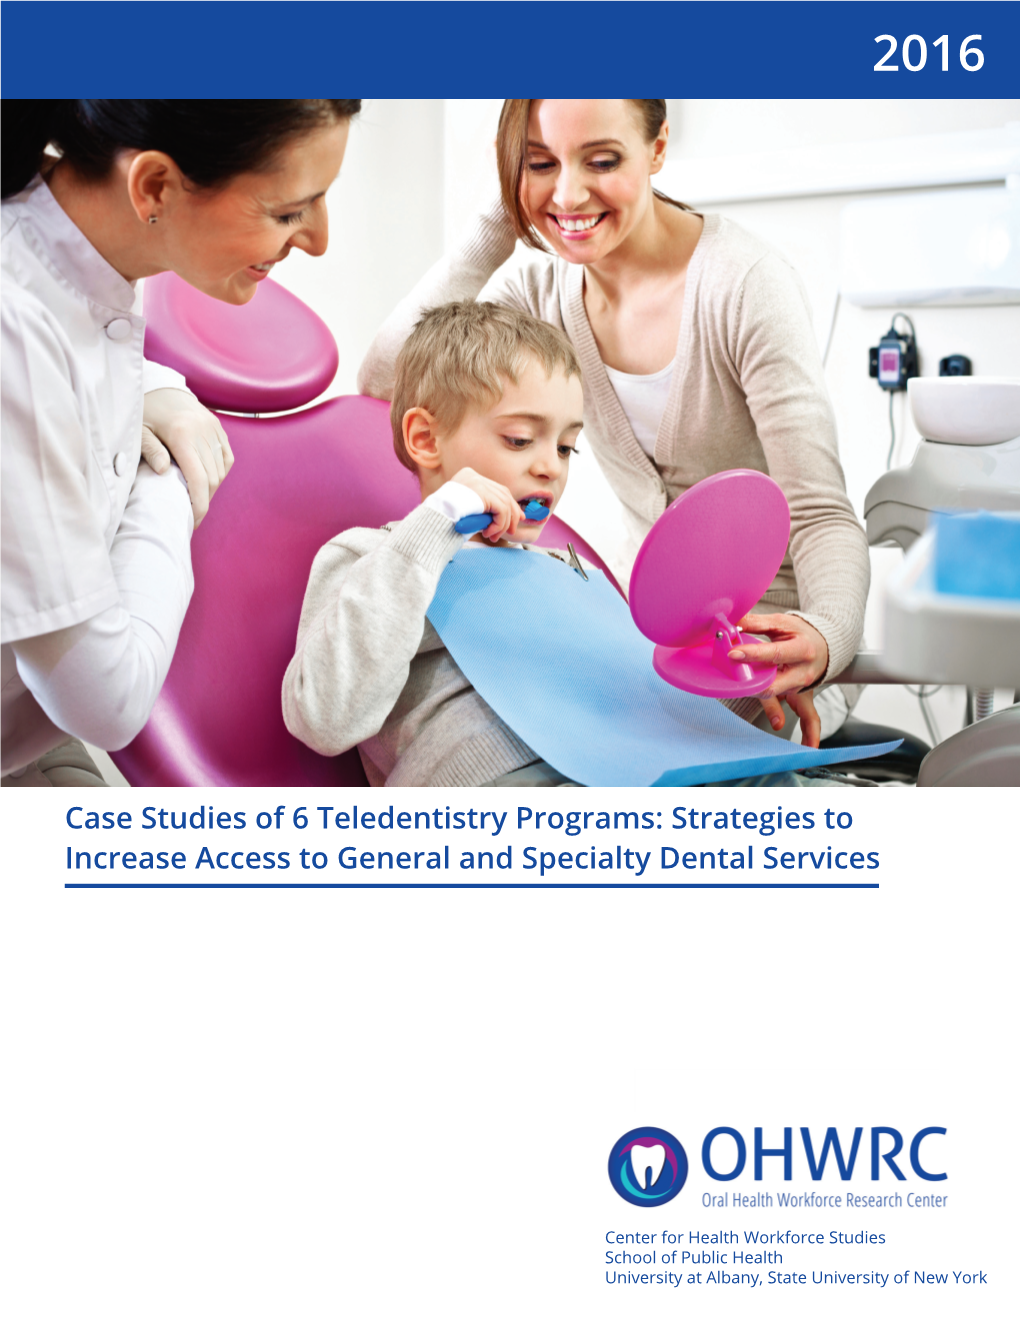 Case Studies of 6 Teledentistry Programs: Strategies to Increase Access to General and Specialty Dental Services